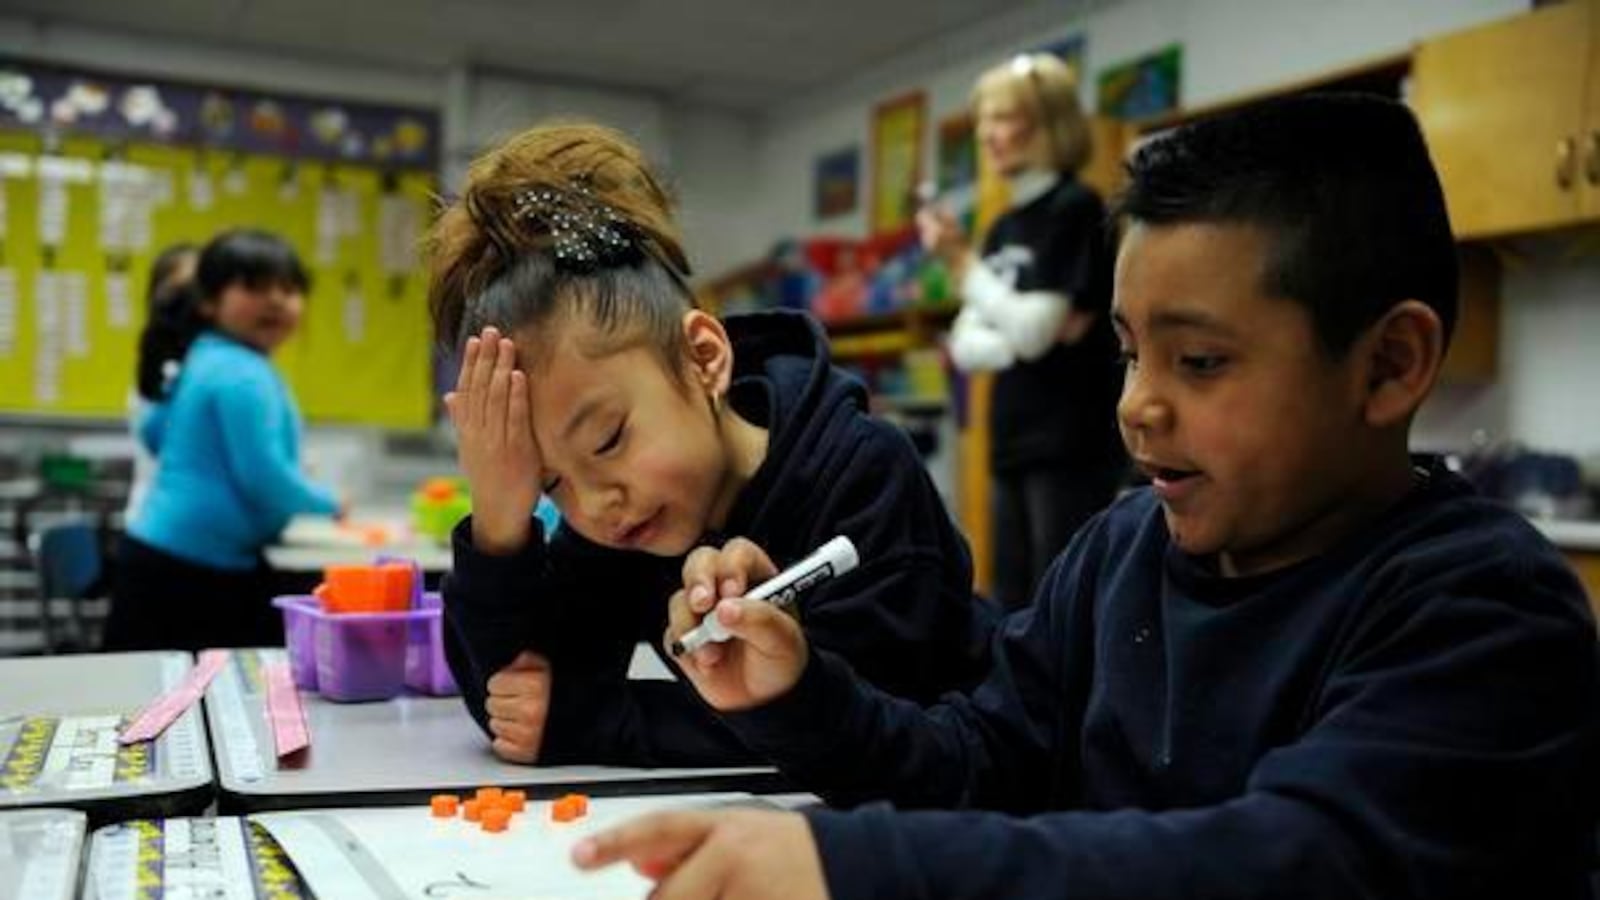 Aris Mocada-Orjas, left, and Abel Albarran work on a math problem at Hanson Elementary in Commerce City. (Denver Post file photo)